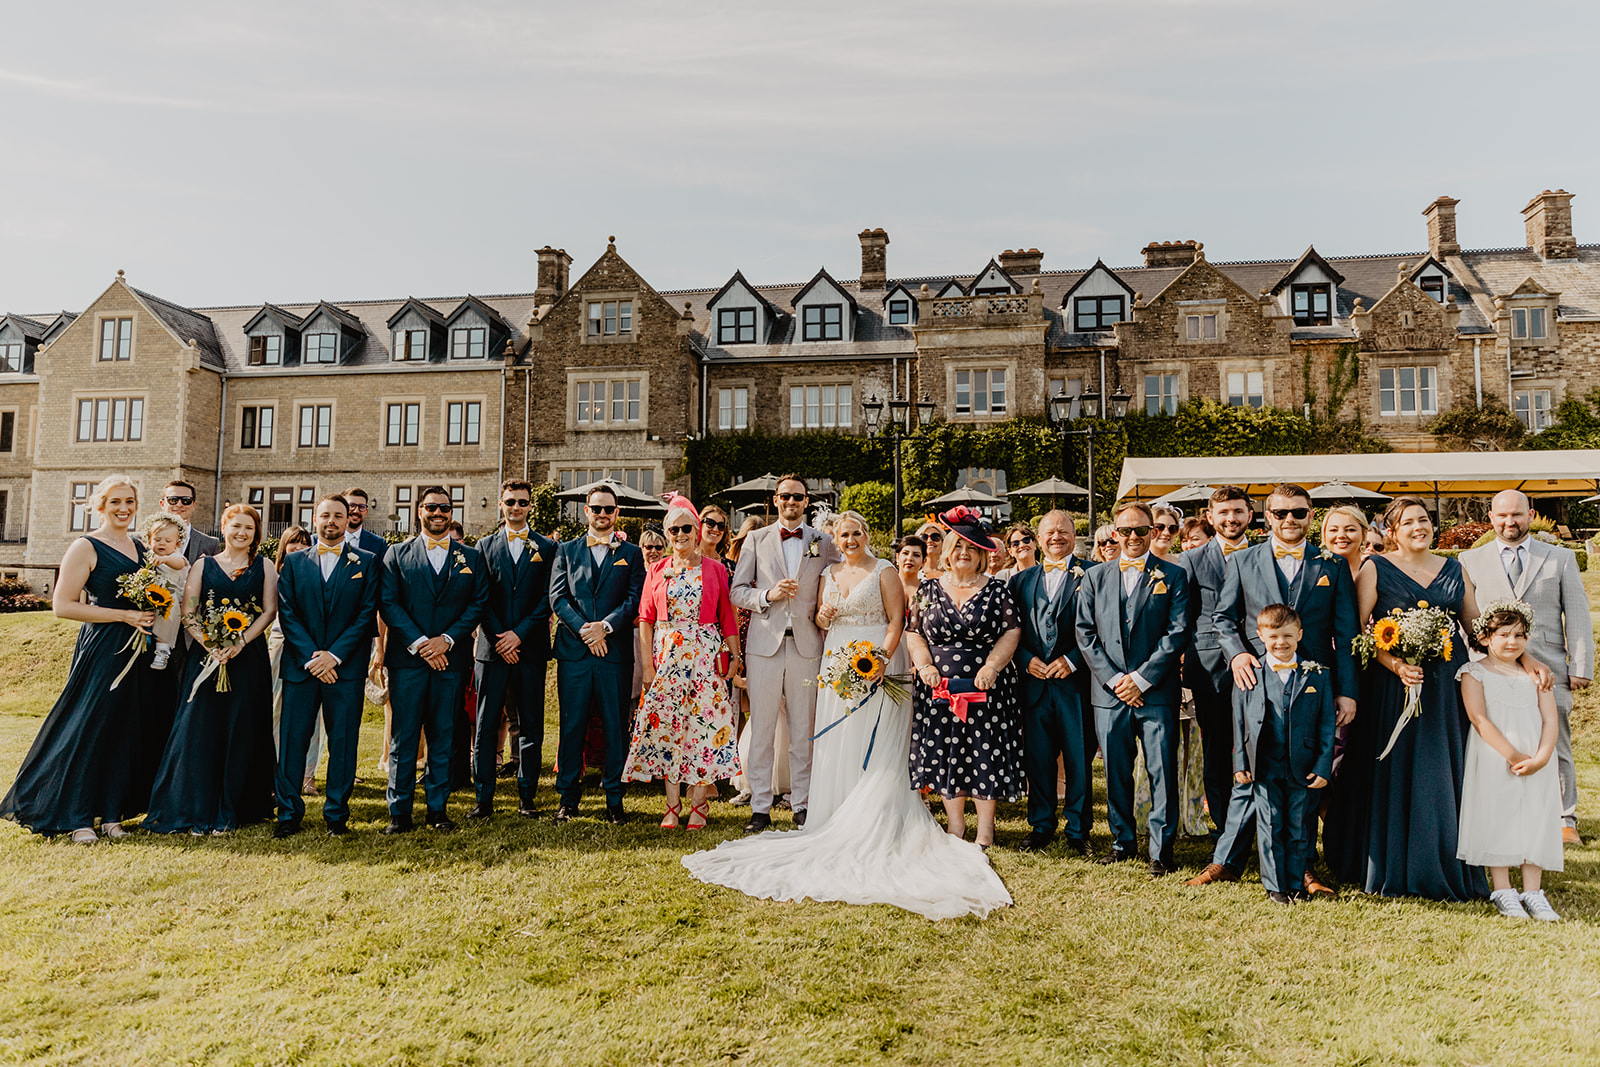 Bridal party at a South Lodge, Sussex Wedding. By Olive Joy Photography